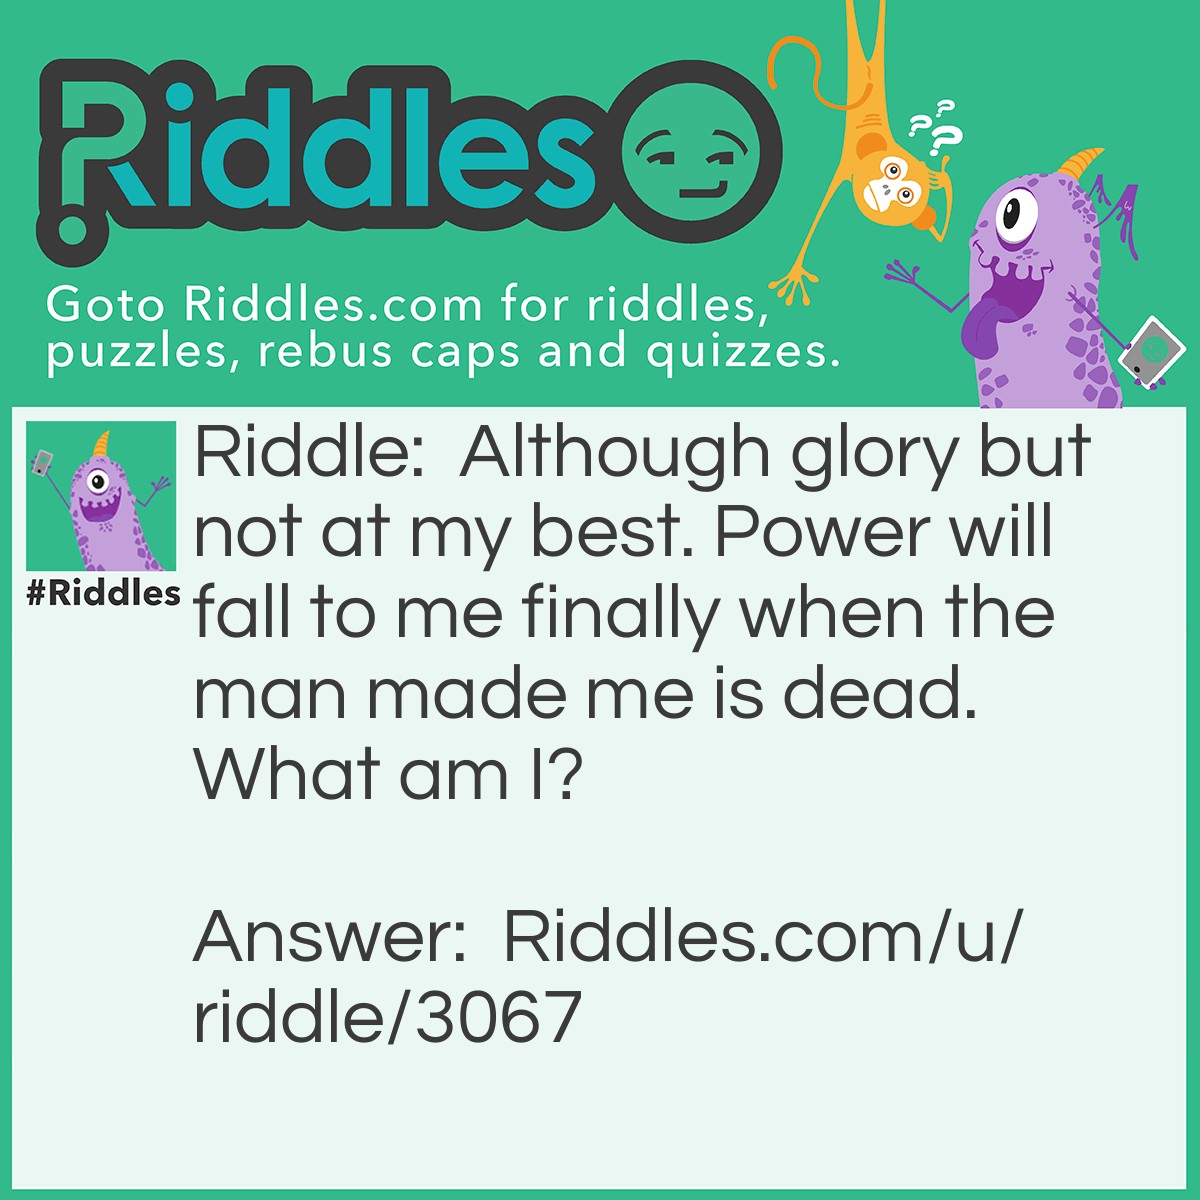 Riddle: Although glory but not at my best. Power will fall to me finally when the man made me is dead. What am I? Answer: A Prince.